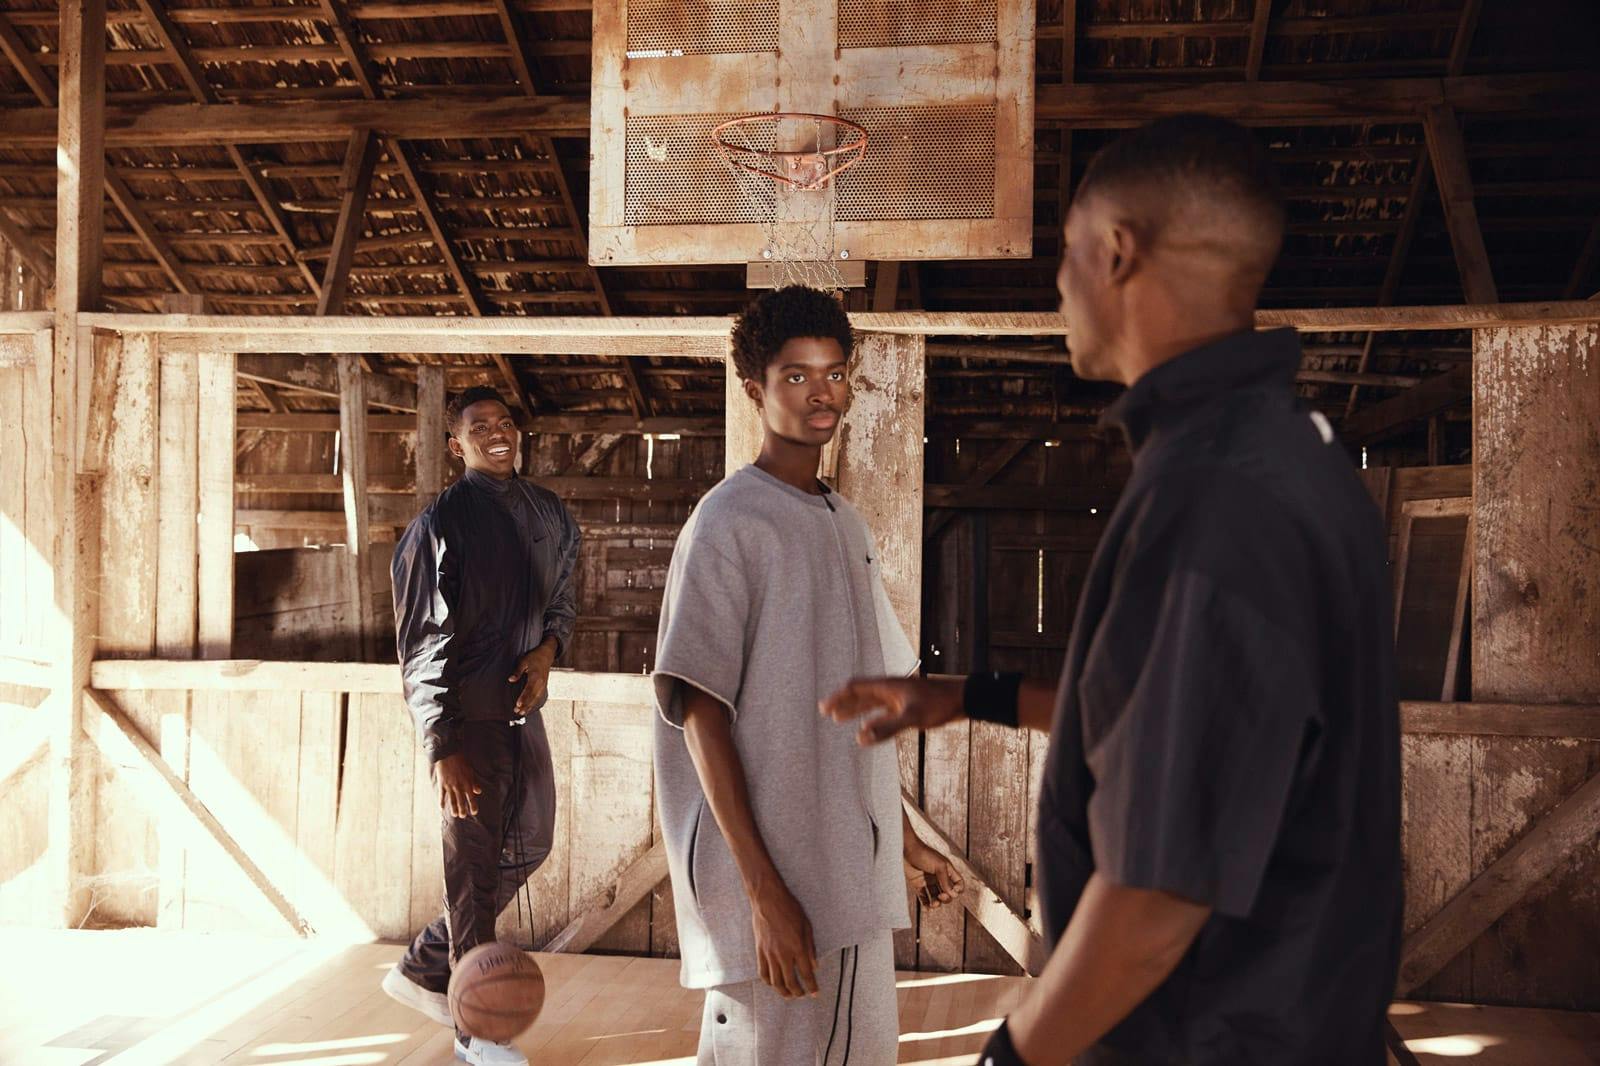 Nike Air Fear of God Apparel Collection - Launching 19th January